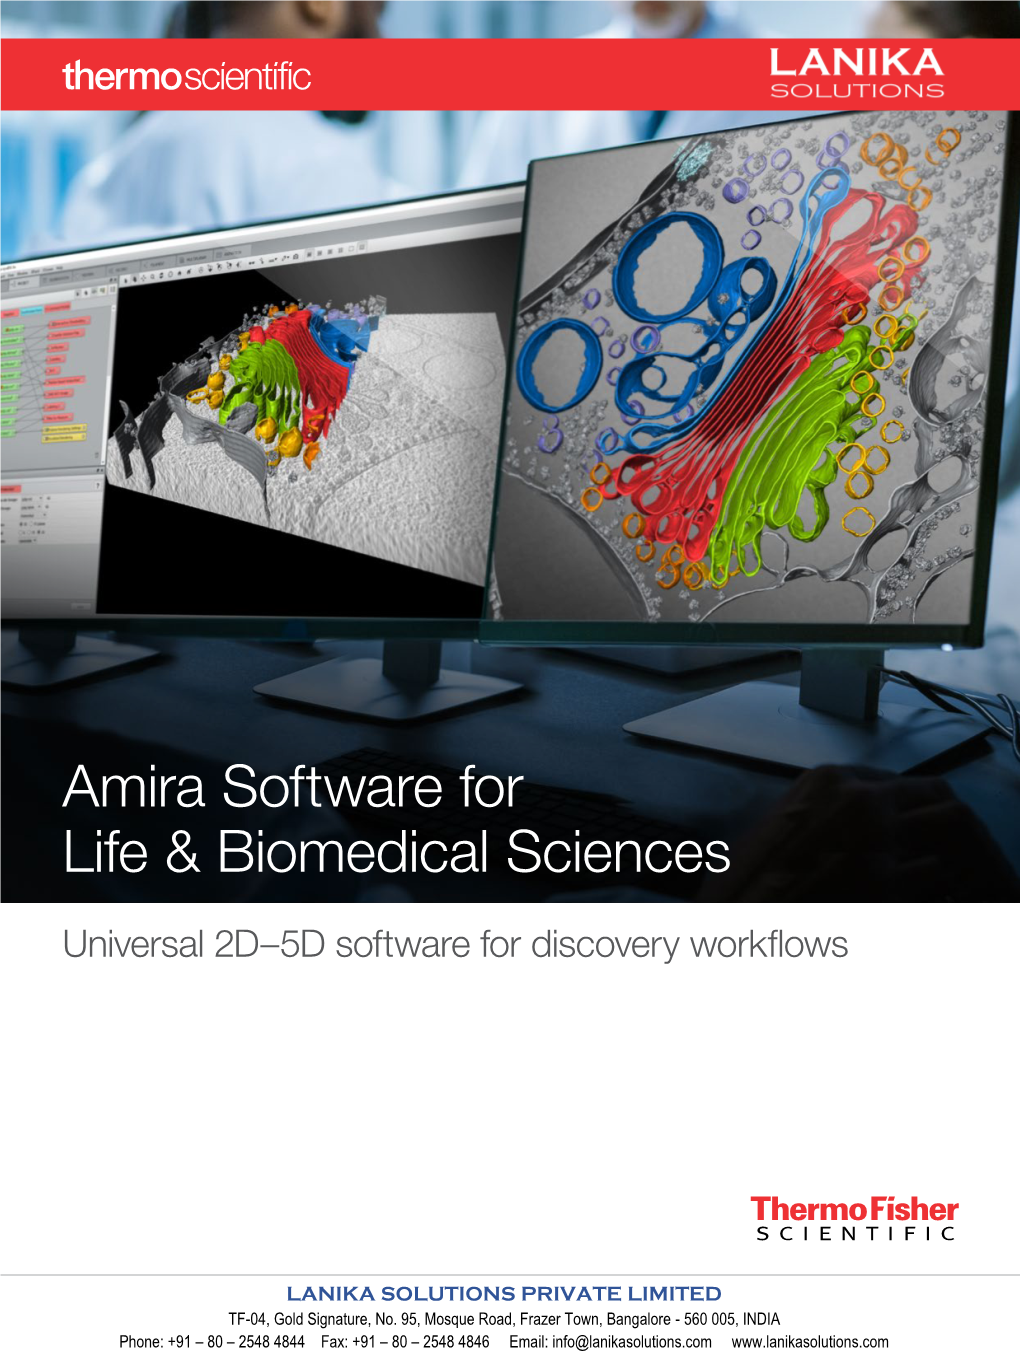 Amira Software for Life & Biomedical Sciences